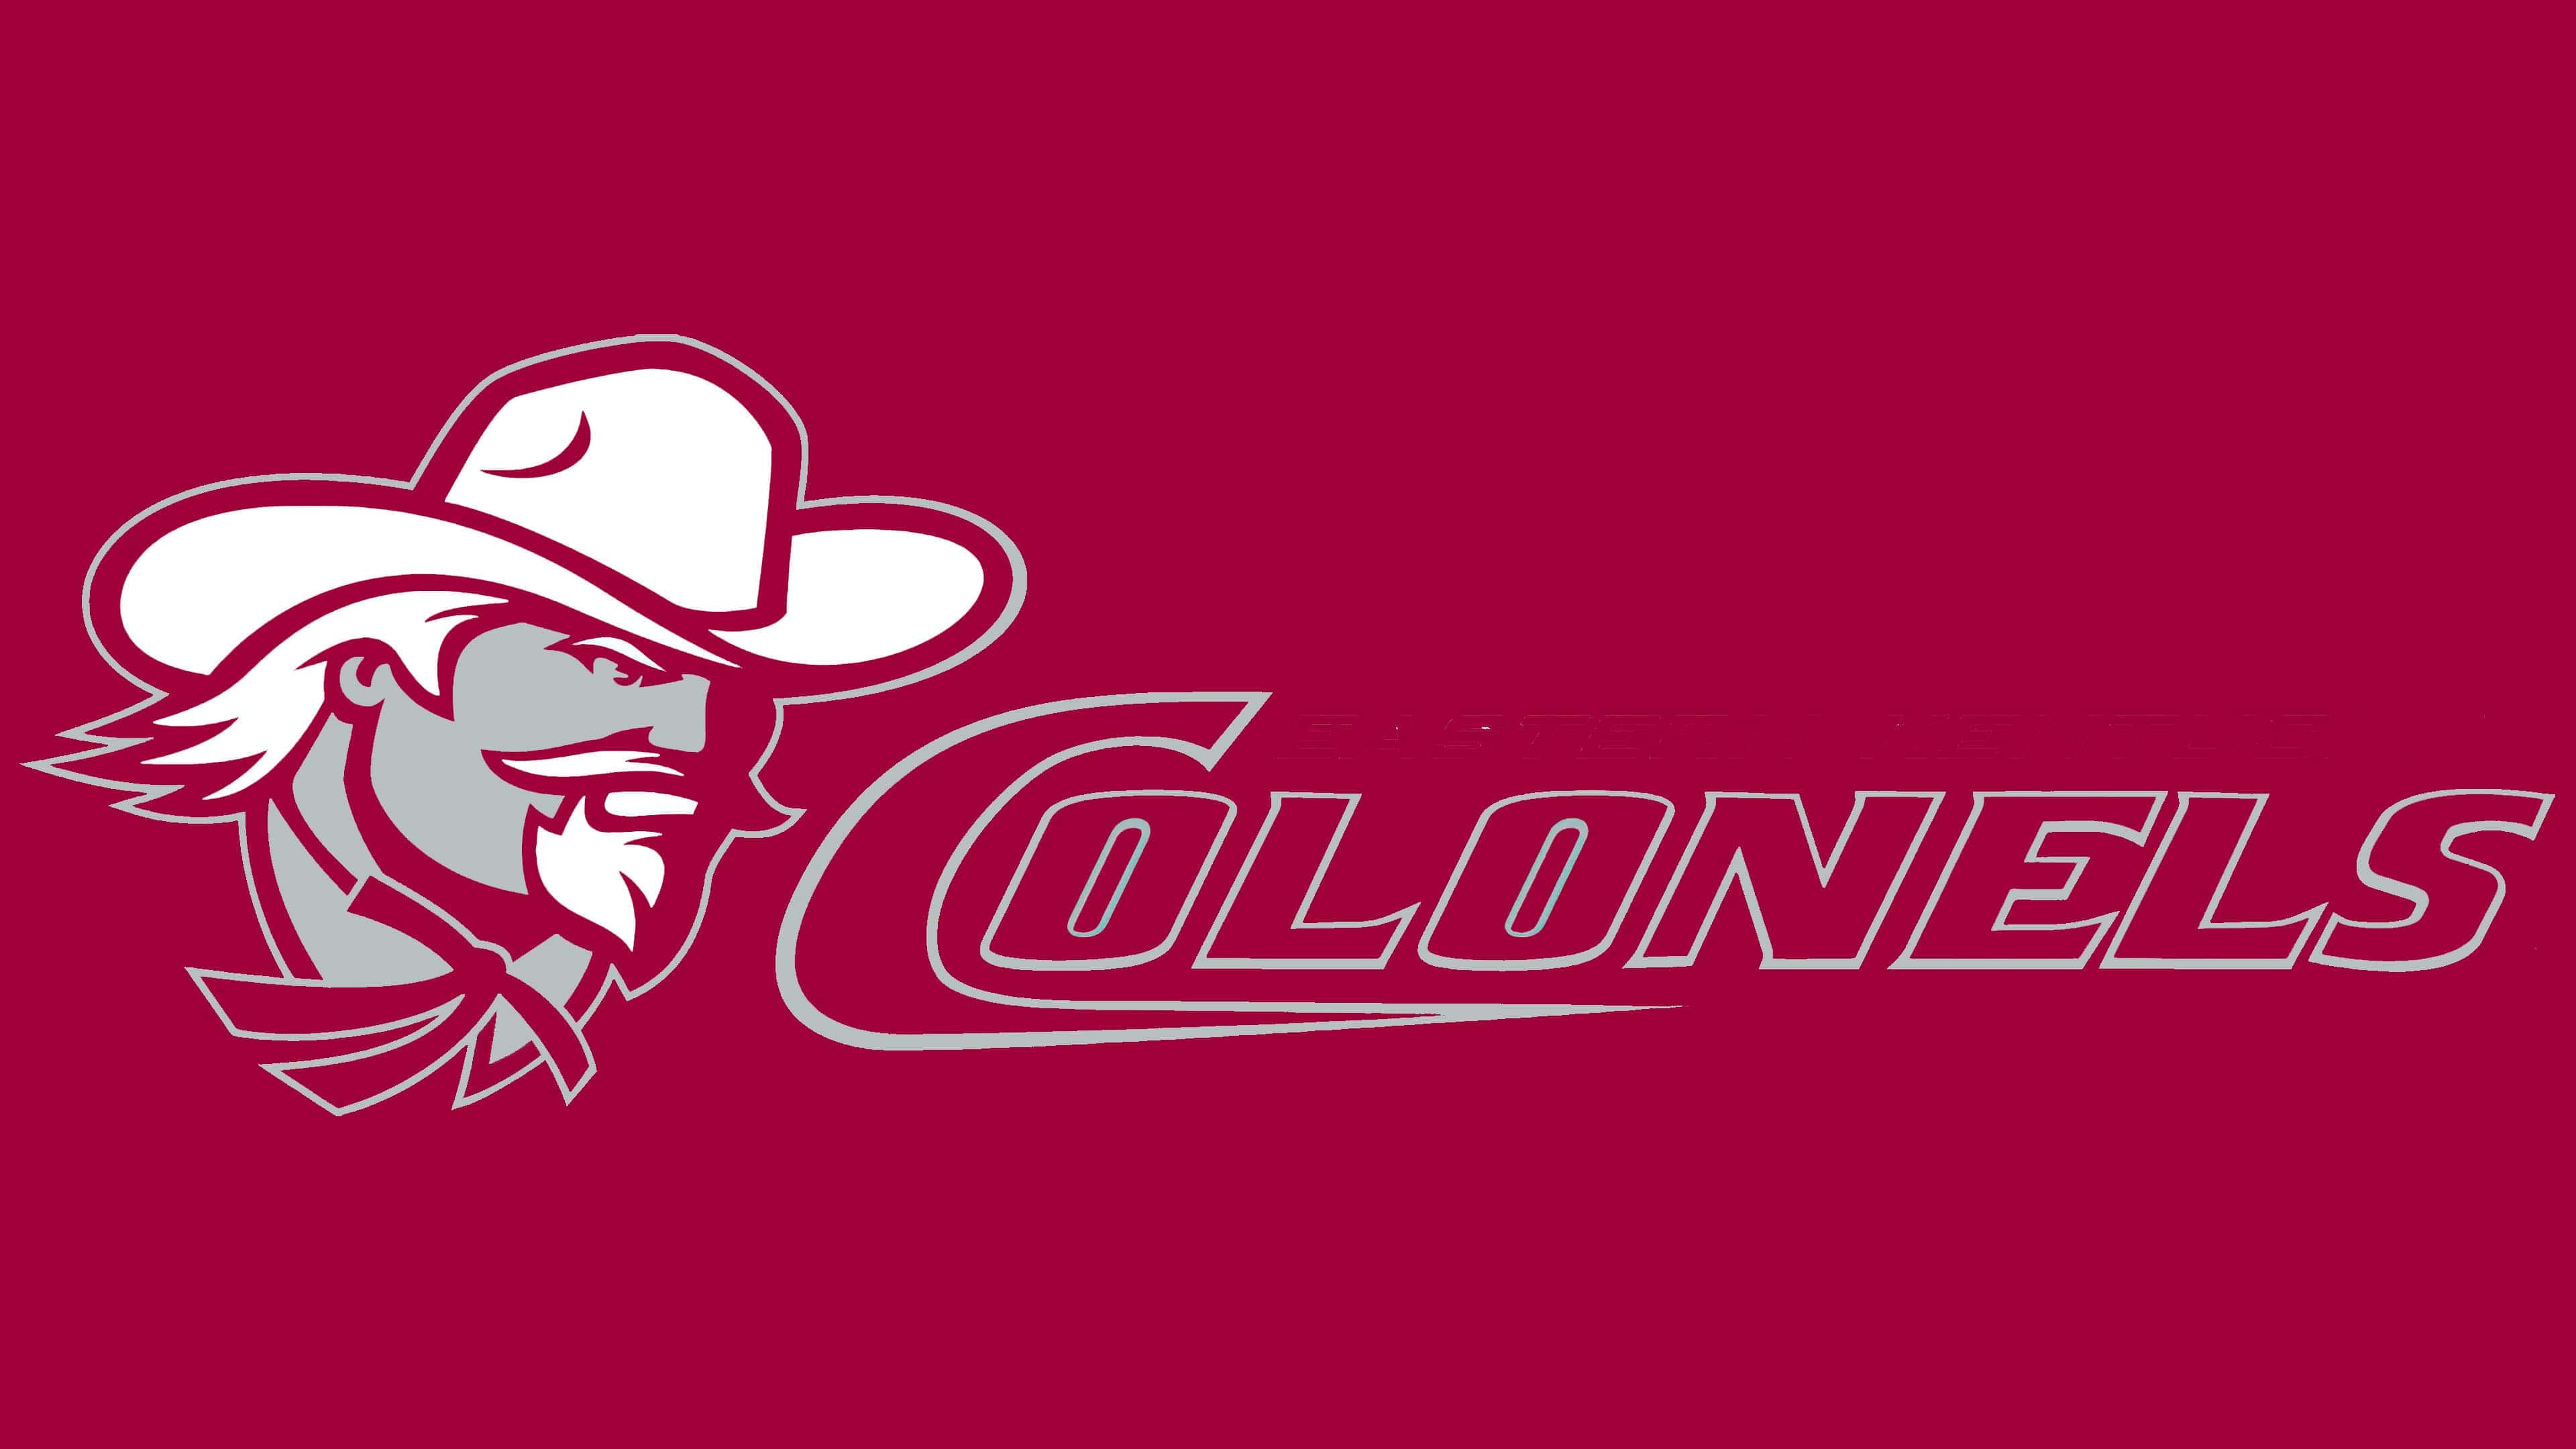 Eastern Kentucky Colonels Logo, symbol, meaning, history, PNG, brand